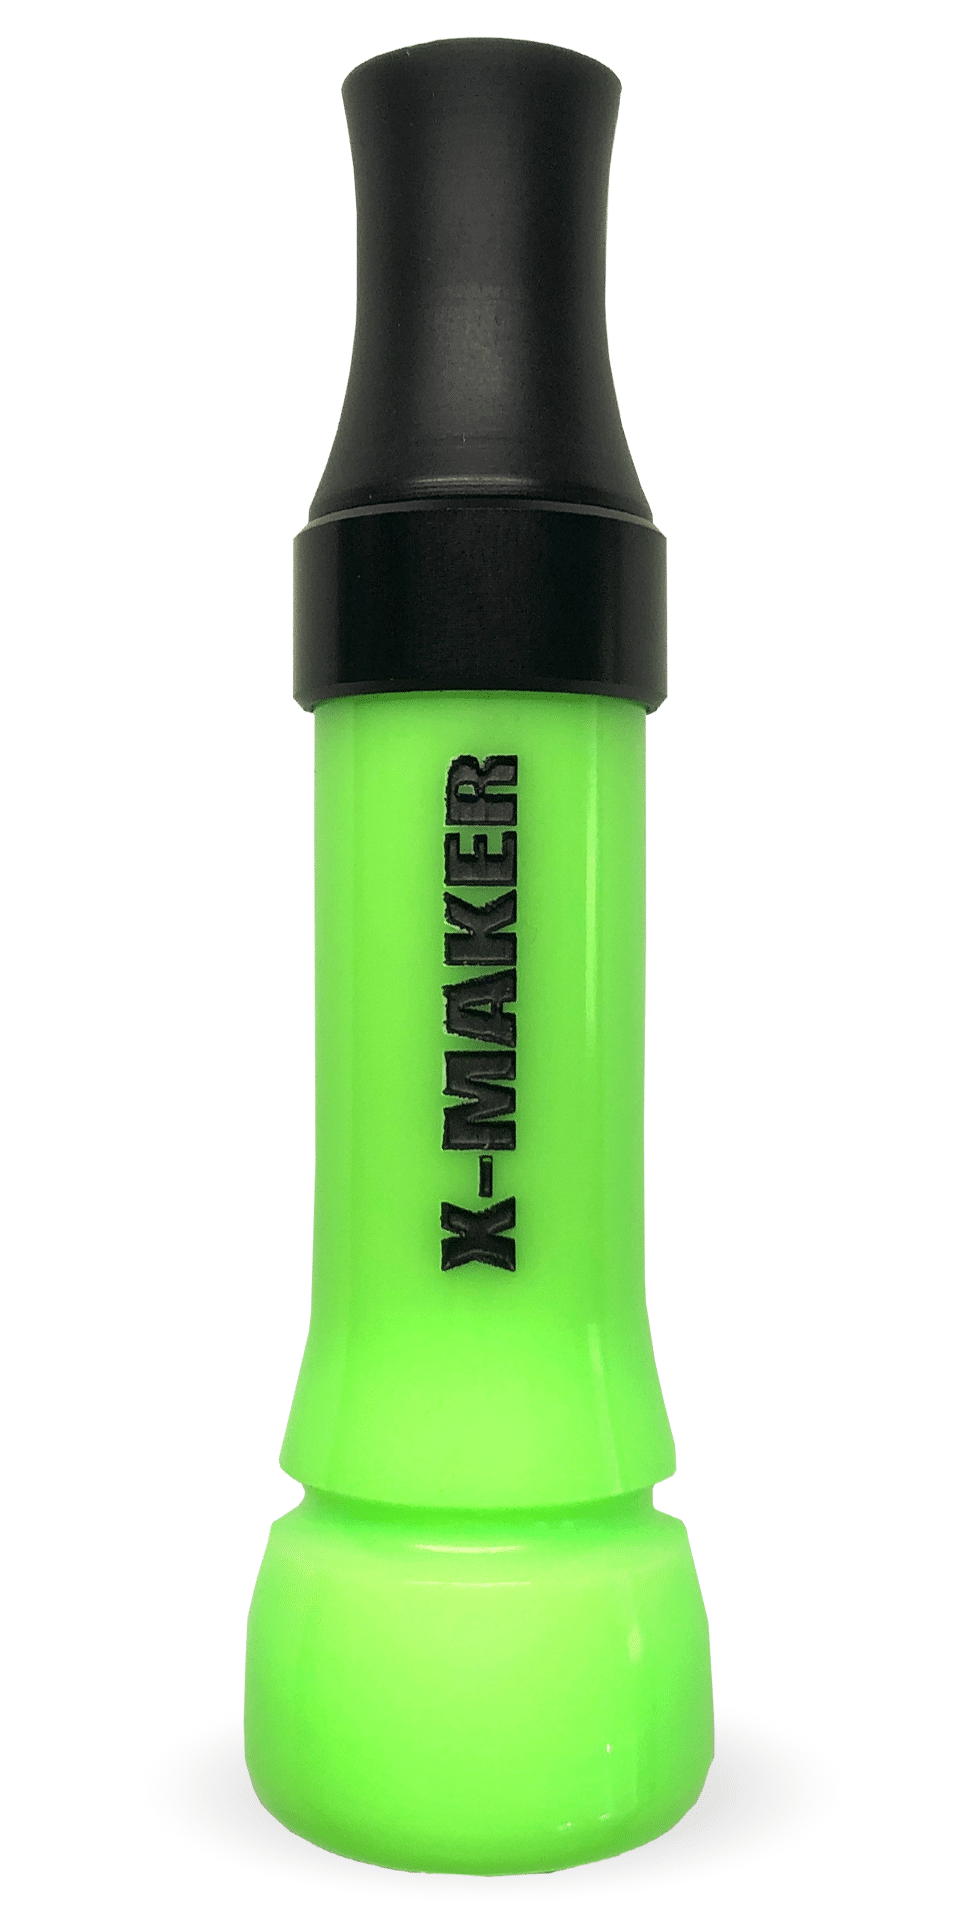 Introducing the X-MAKER Cut-Down Mallard Duck Call in vibrant Fluorescent Green, featuring a sleek Black Anodized Band and a Threaded Cast Acrylic Flared Keyhole Insert. Renowned for their responsiveness, these calls deliver exceptional high and low-end tones with loud, smooth, and user-friendly performance. Designed, crafted, tuned, and available exclusively from Kirk McCullough in Arkansas, they stand as the pinnacle of ease and quality in duck calling equipment.